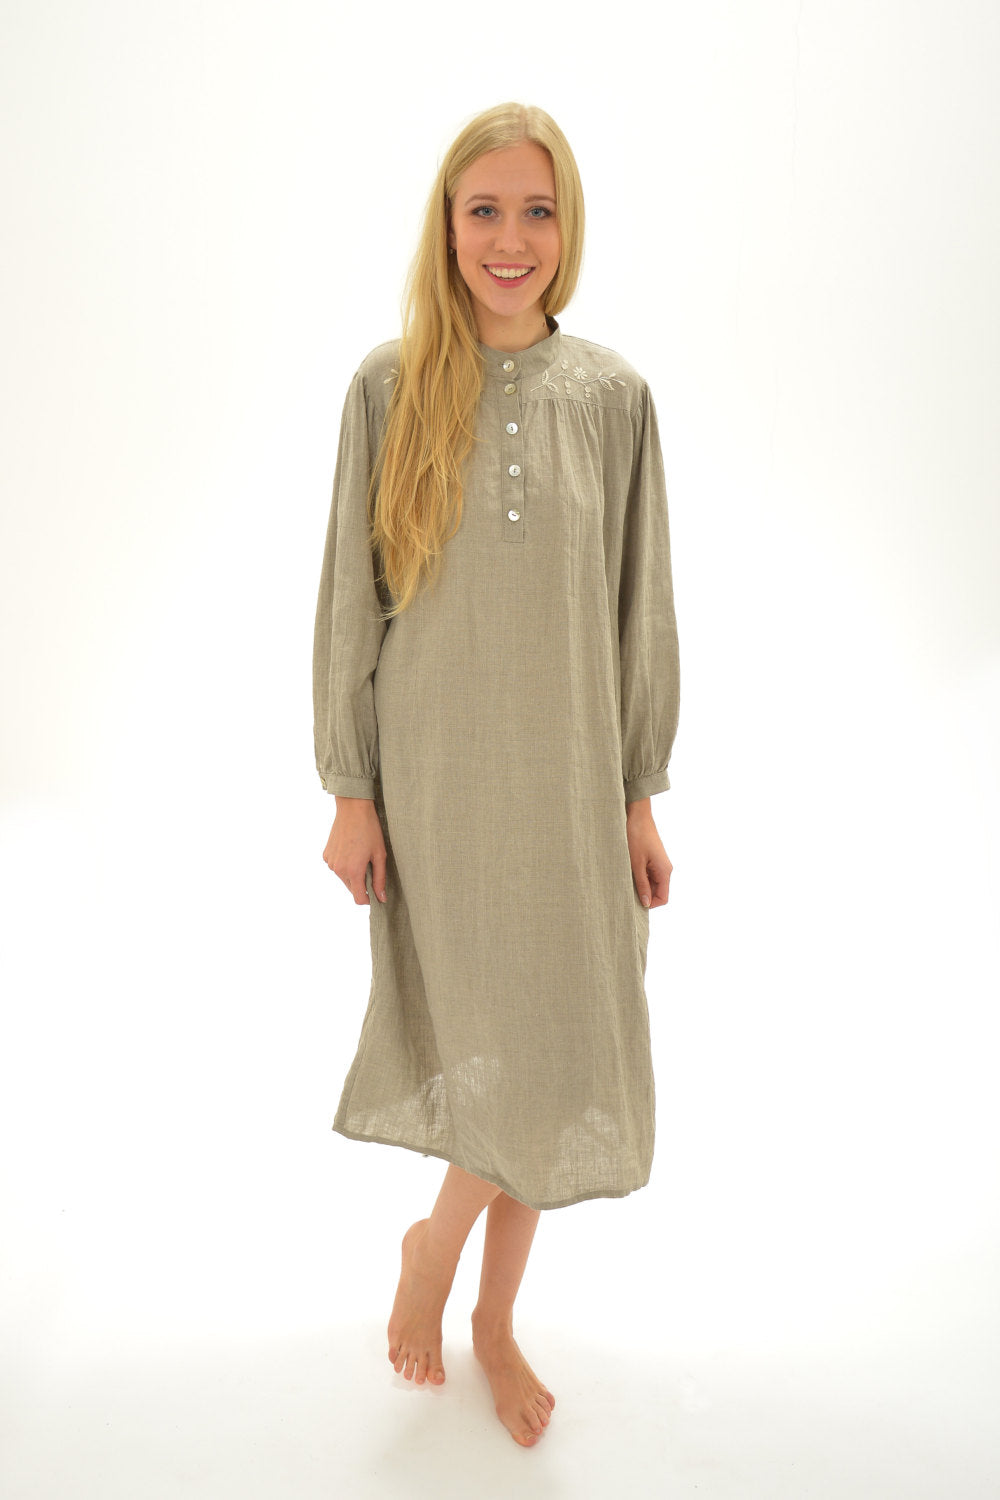 Linen Night Gown VICTORIA with Handmade Embroidery on Yokes